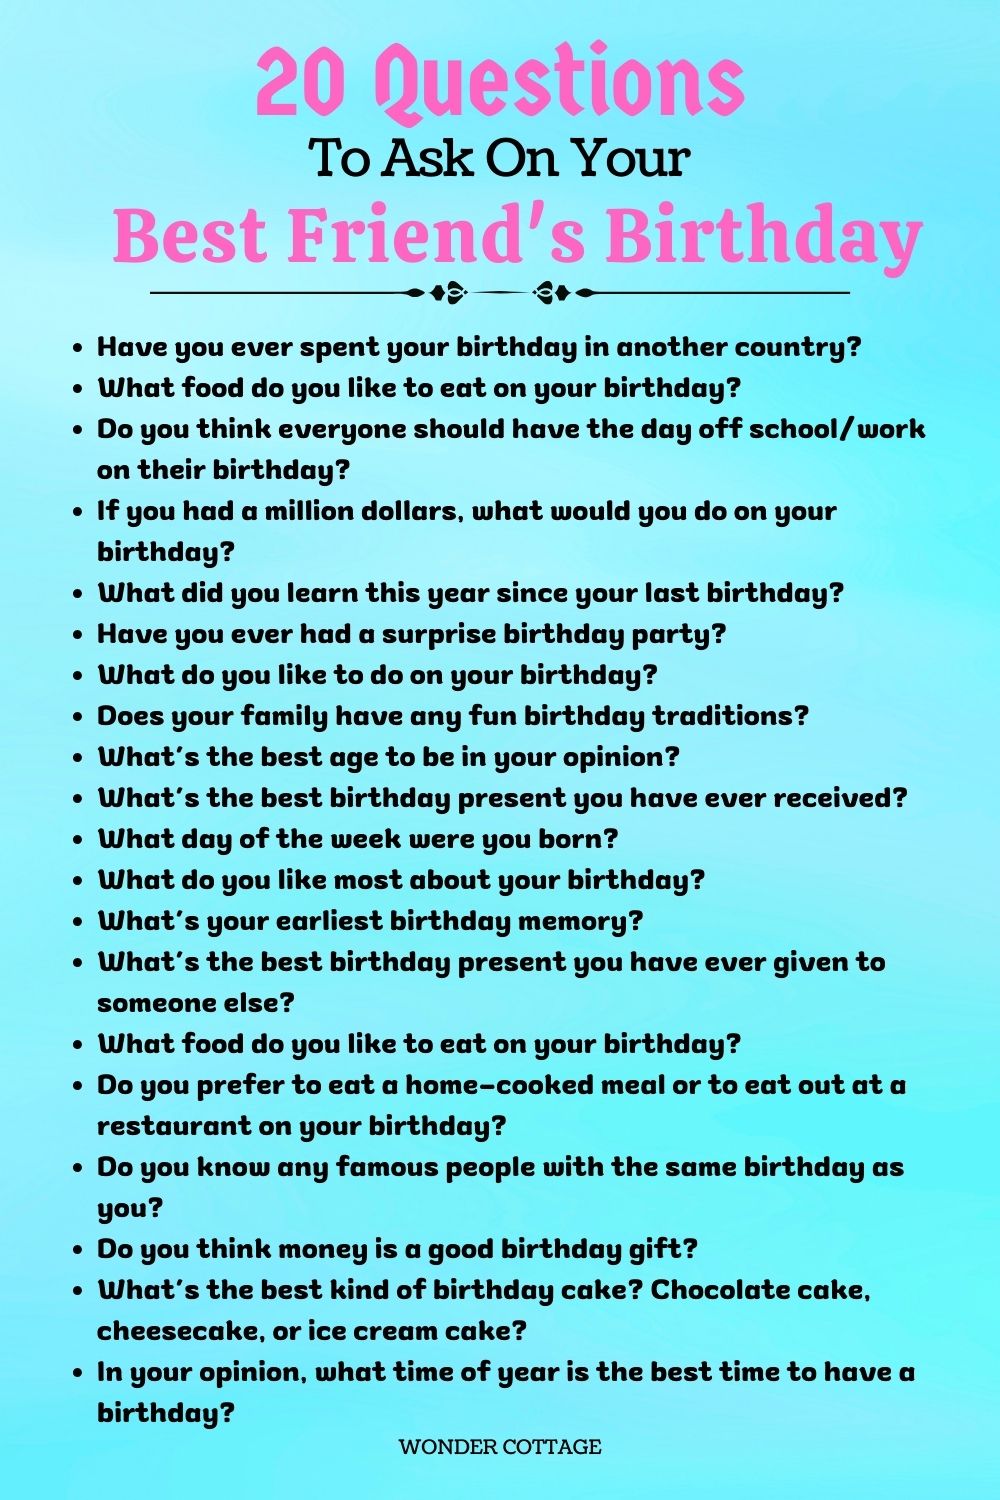 Questions To Ask On Your Best Friend's Birthday